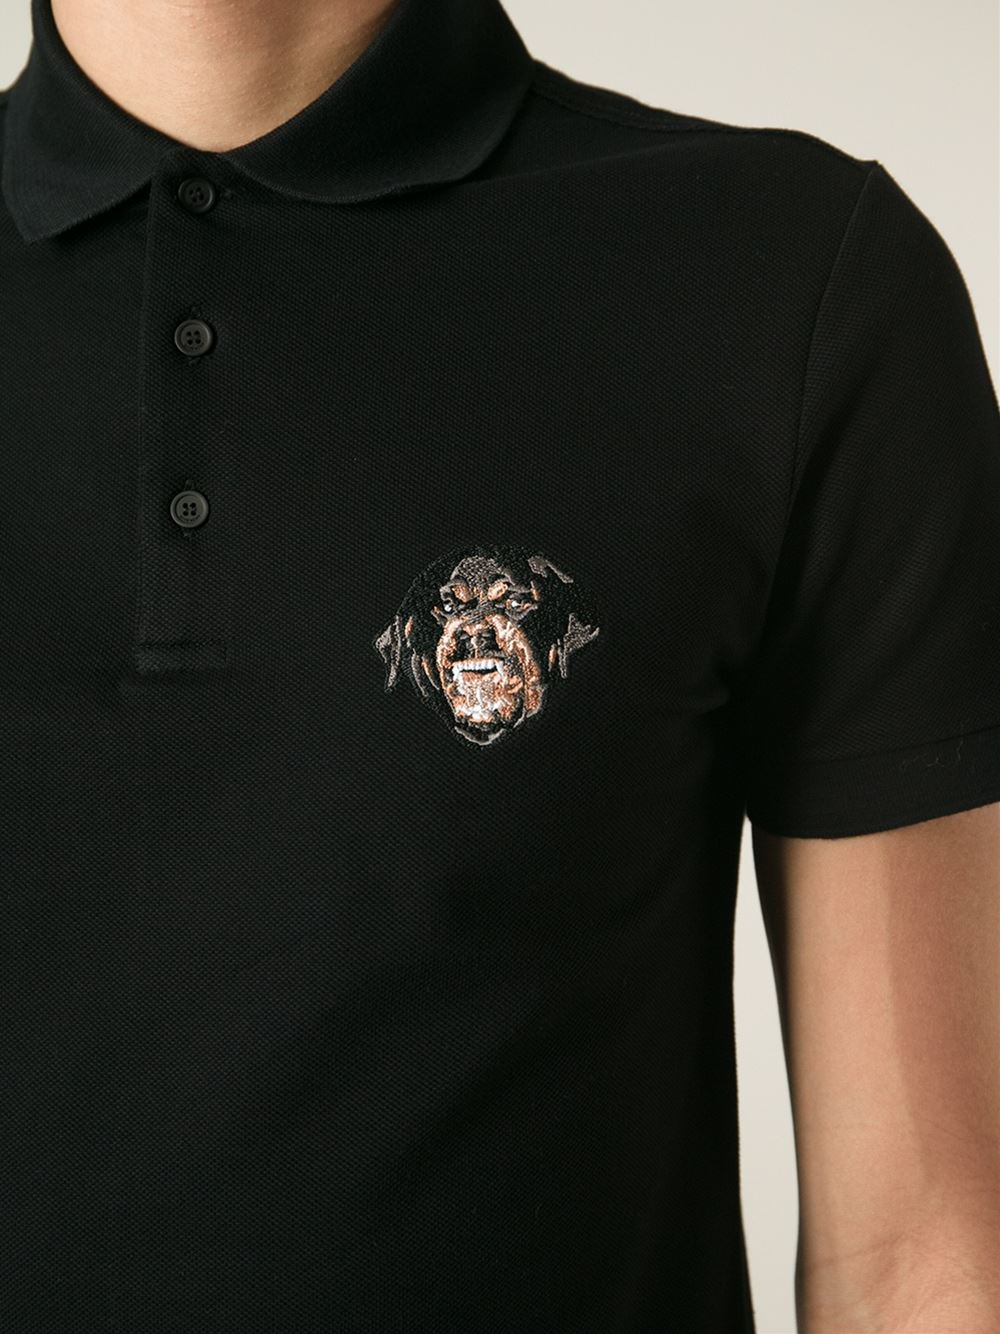 Lyst - Givenchy Rottweiler Polo Shirt in Black for Men